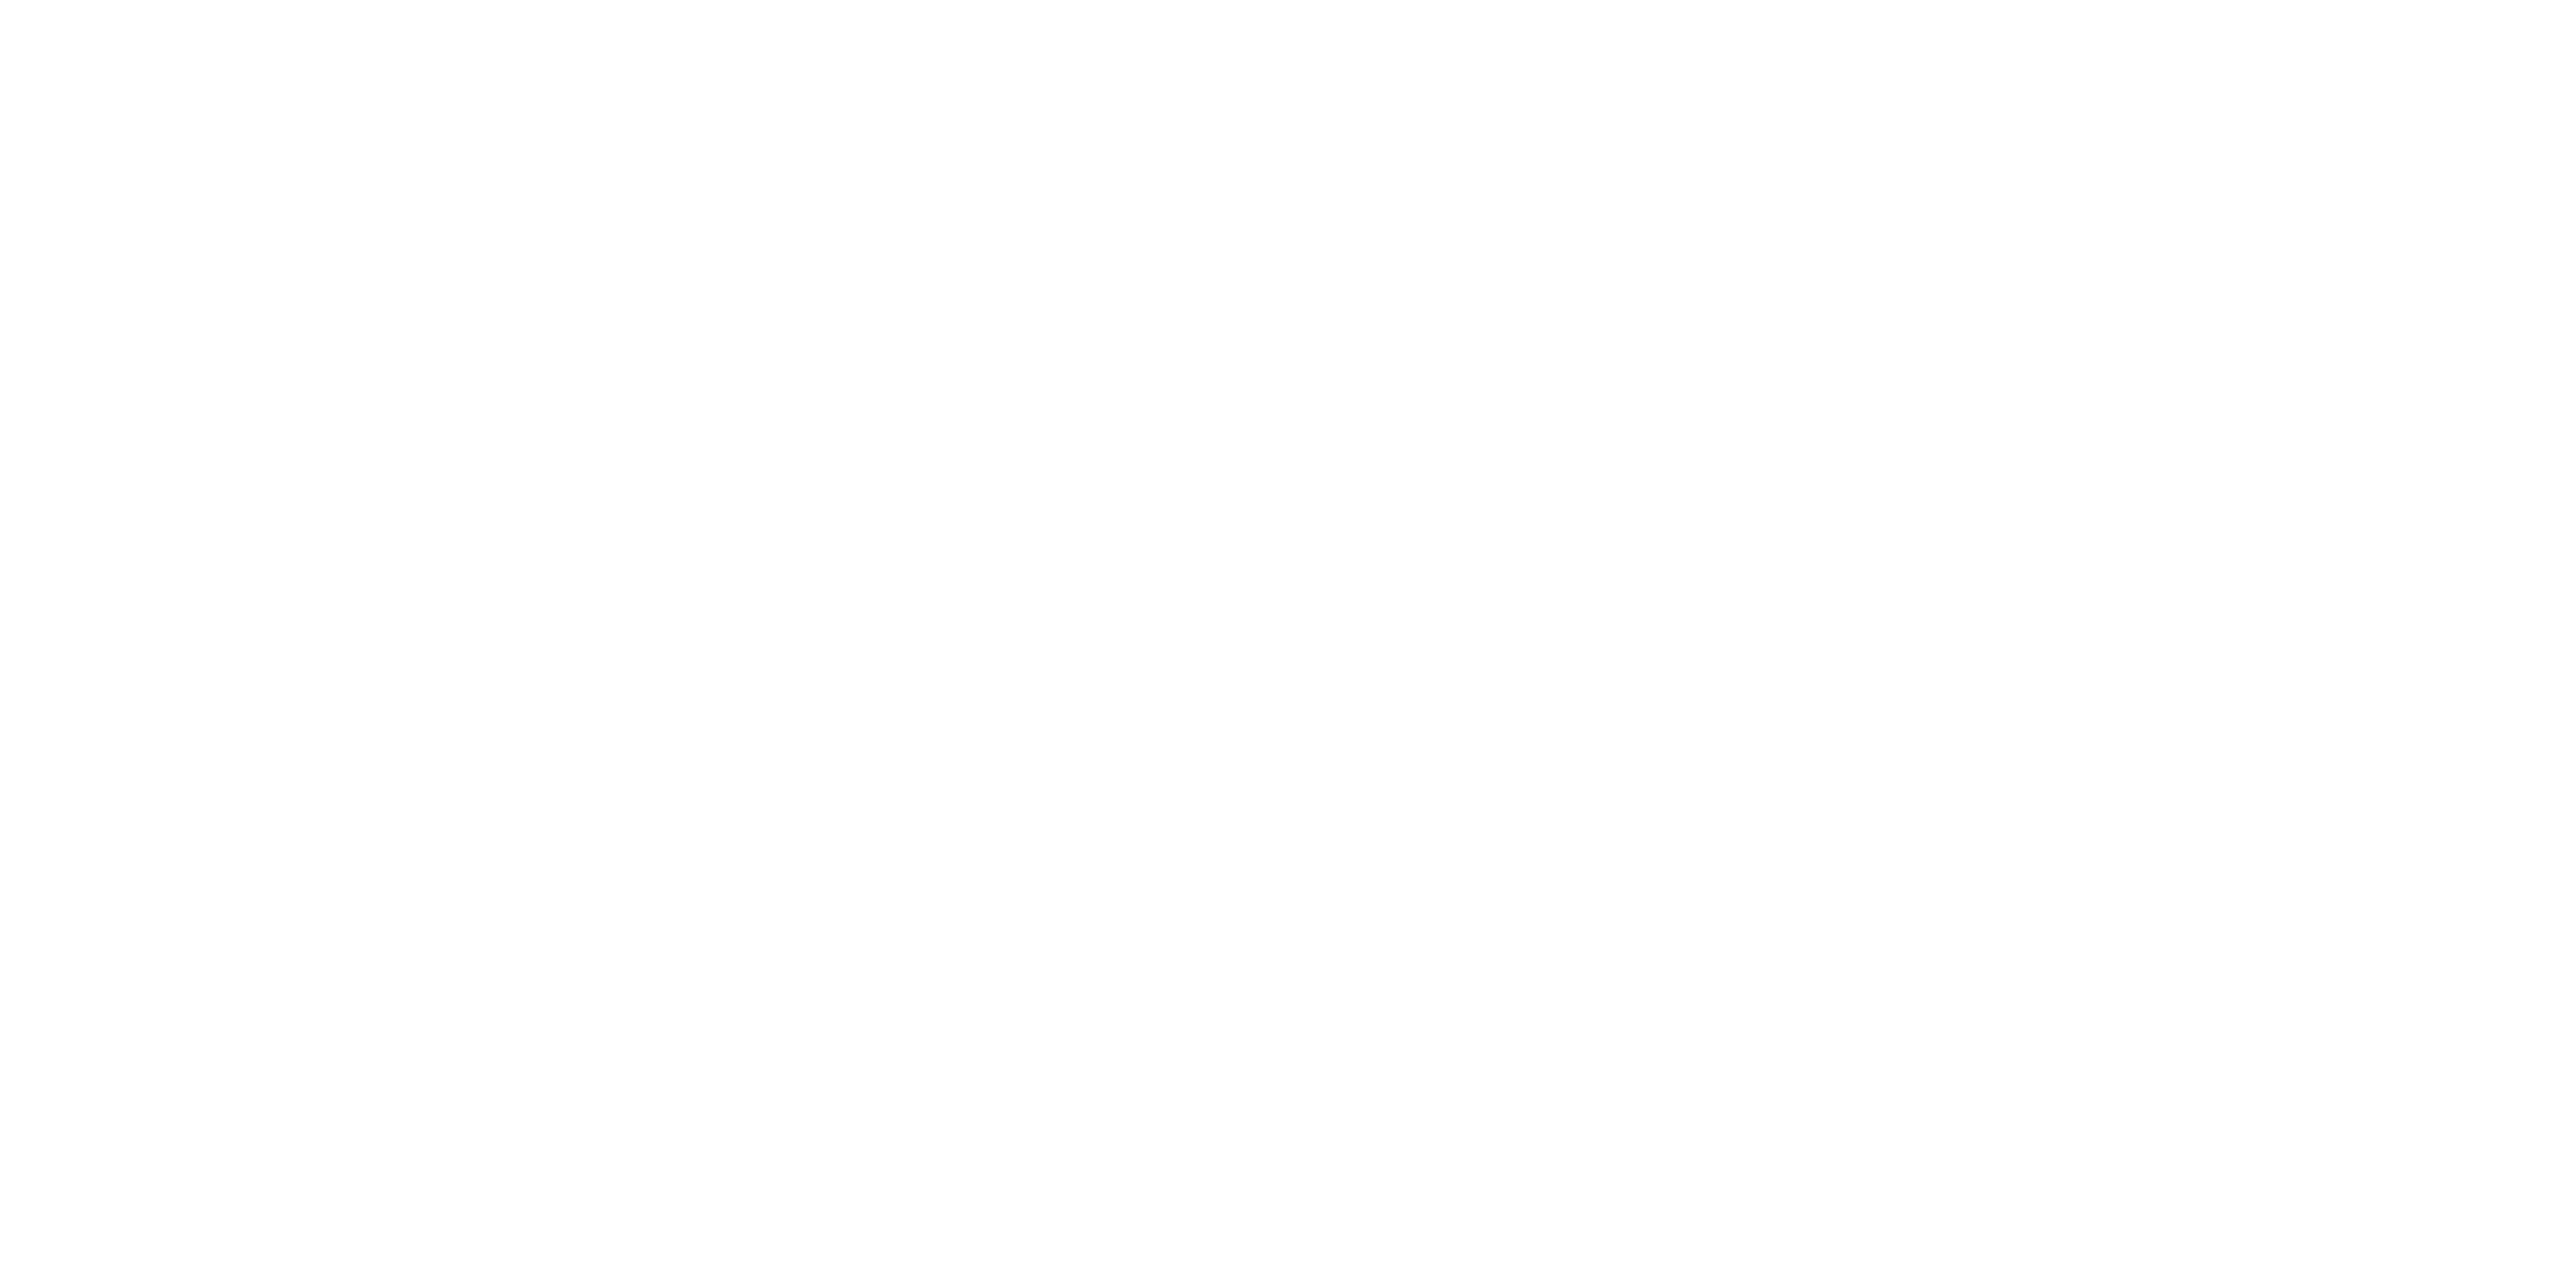 http://copperlanegiftco.com/cdn/shop/files/Copy_of_COPPER_LANE_GIFT_CO_stickers-8.png?v=1654638200